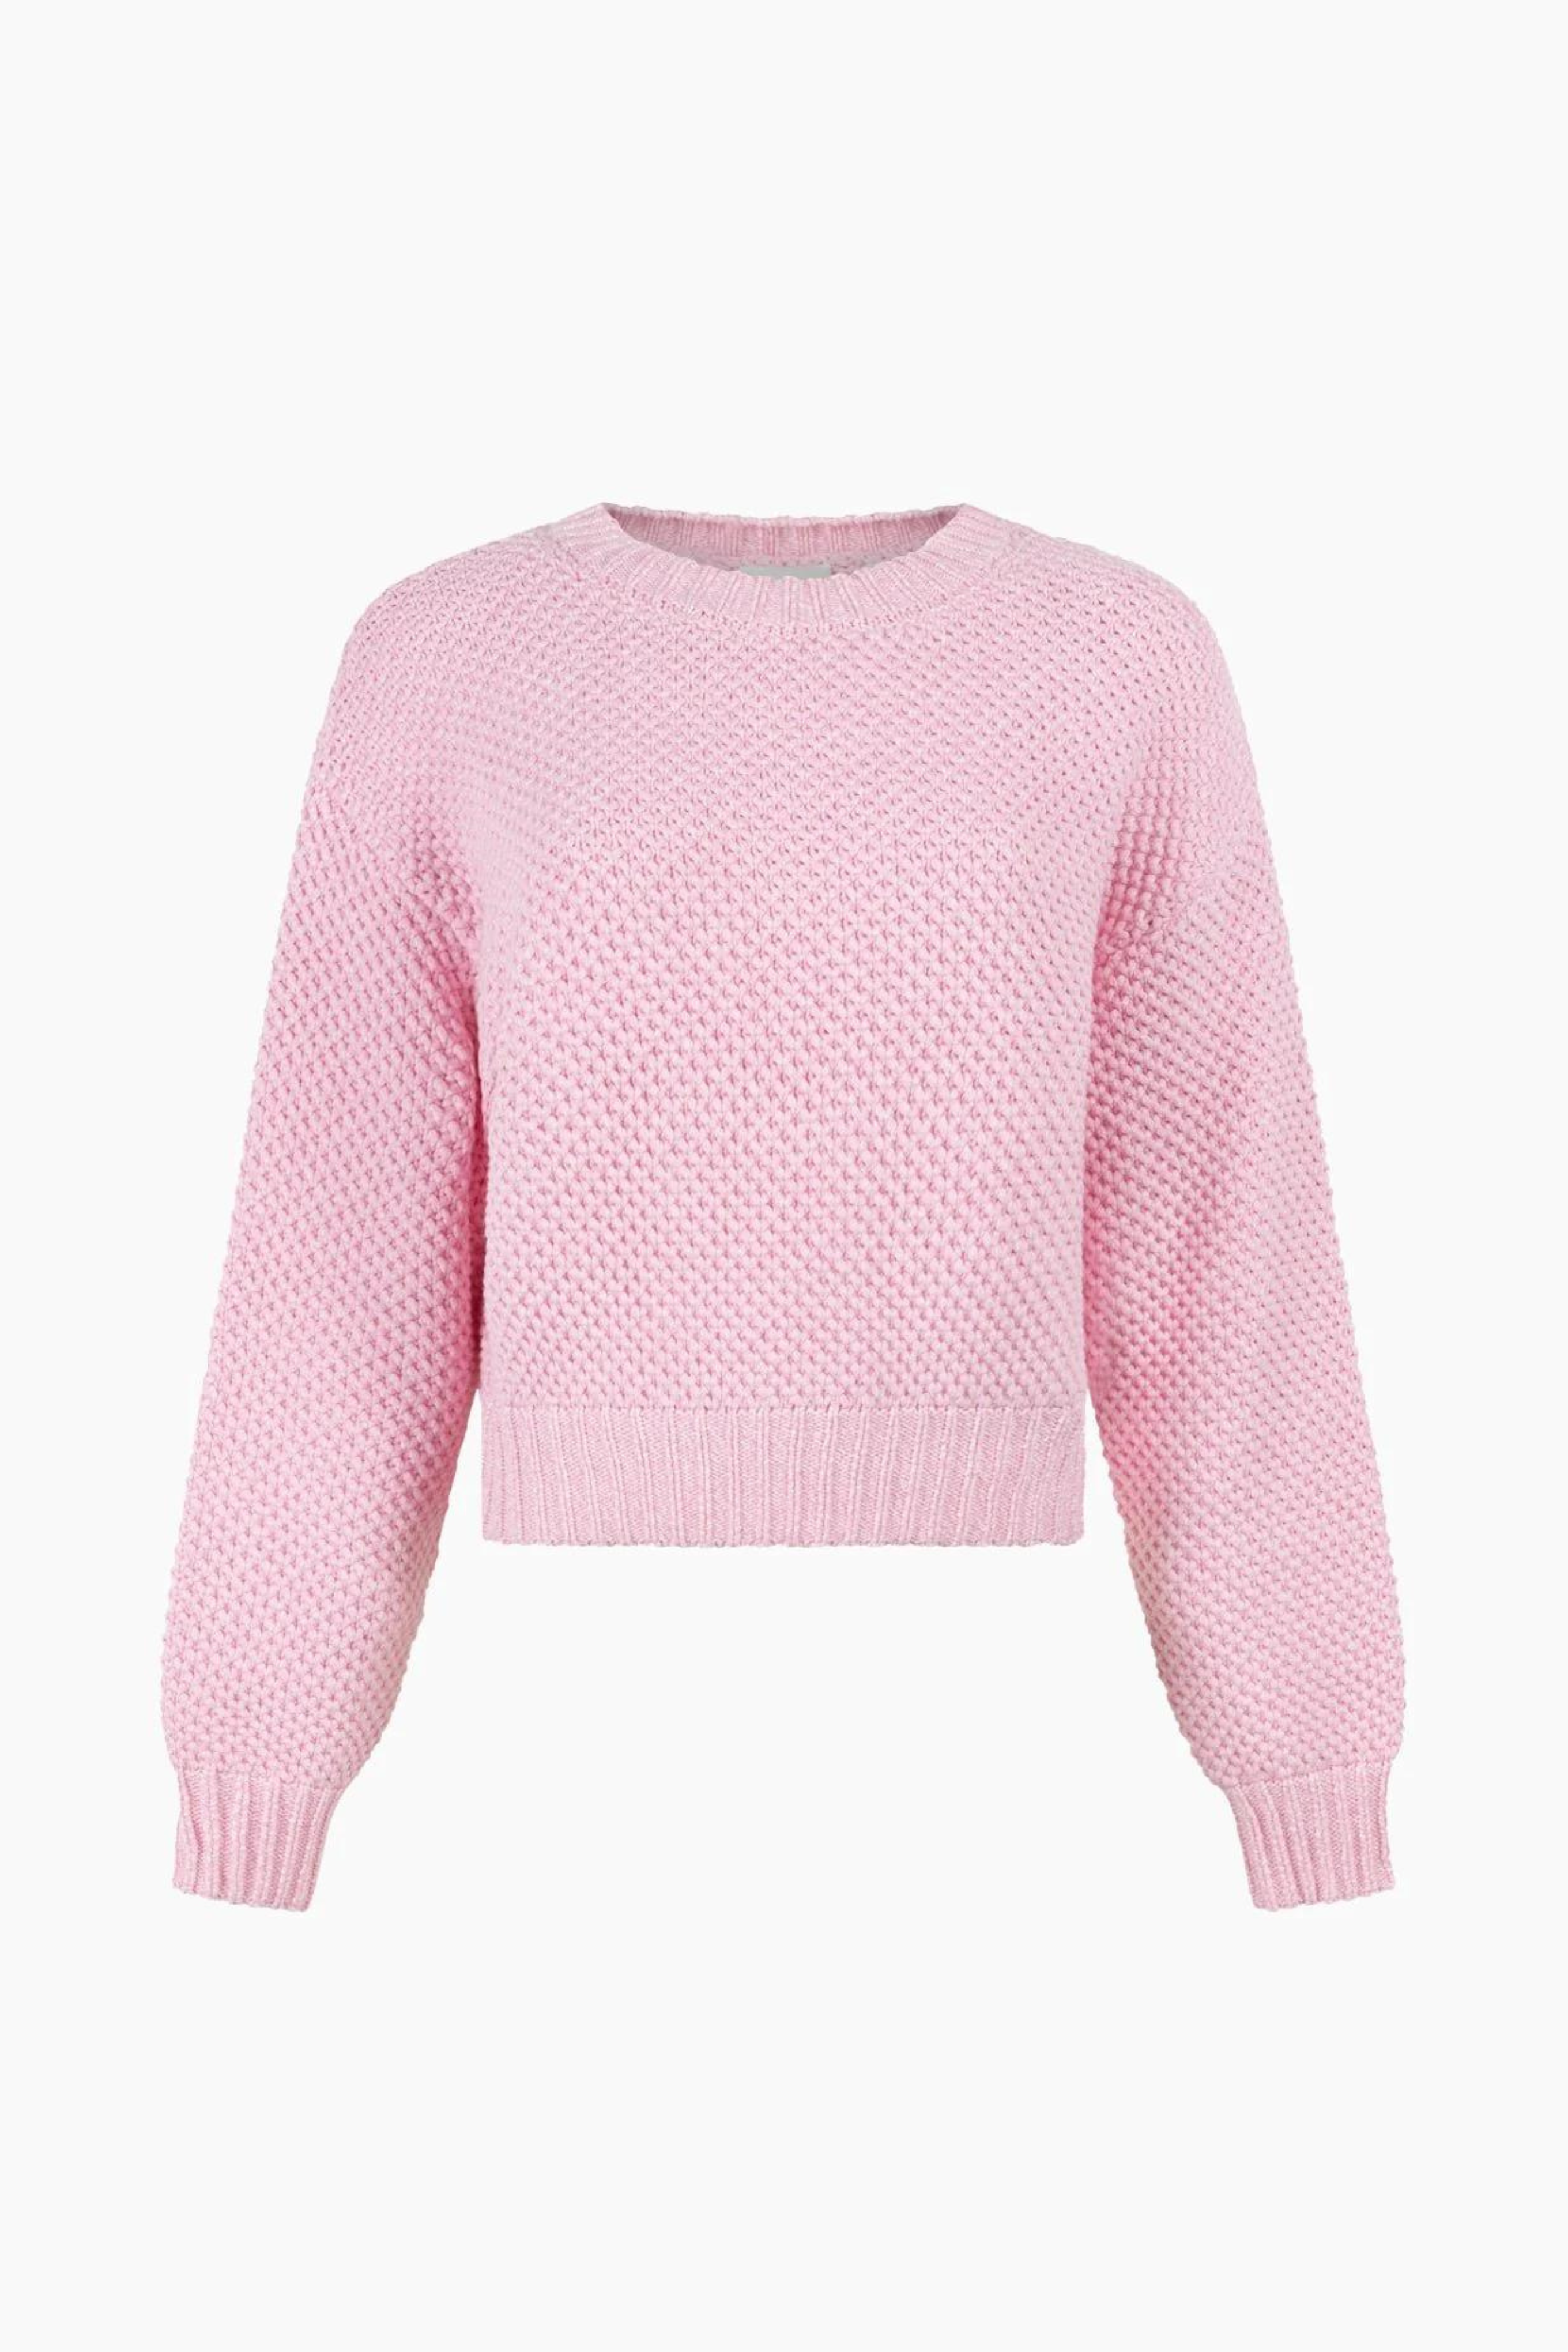 EMILY KNITTED PULL - PINK